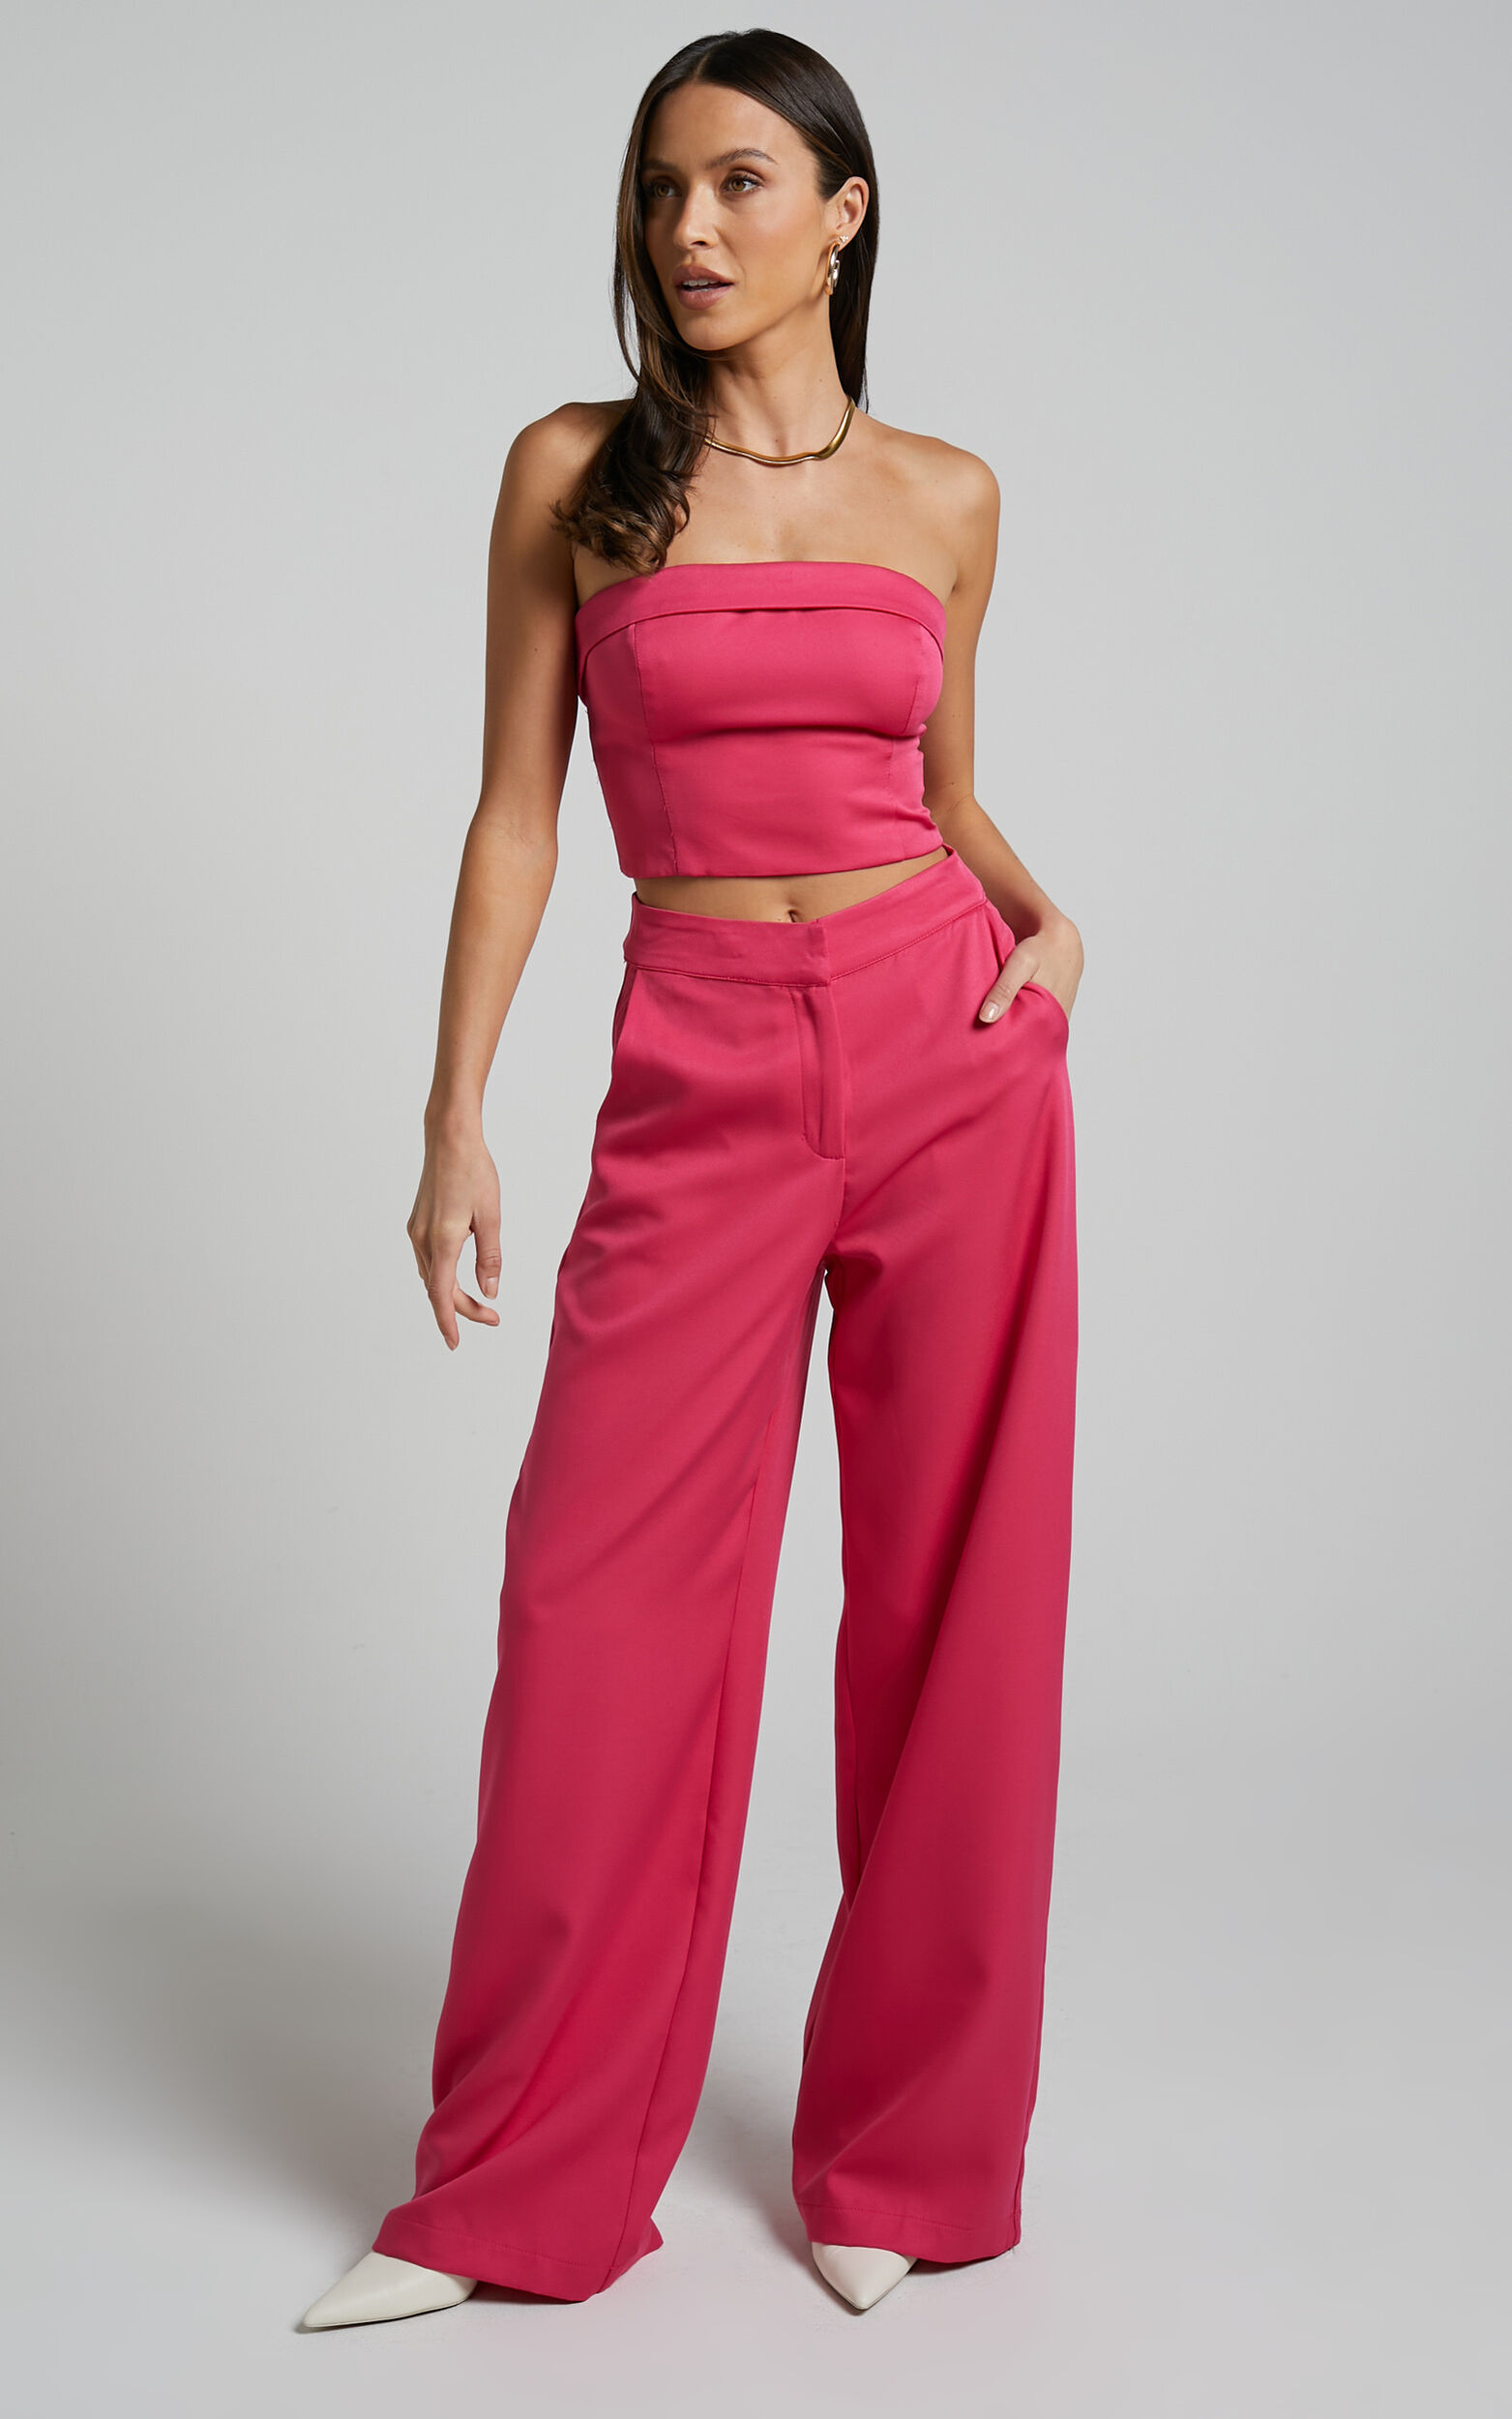 Silvia Two Piece Set - Foldover Top and Wide Leg Pant in Hot Pink - 04, PNK1